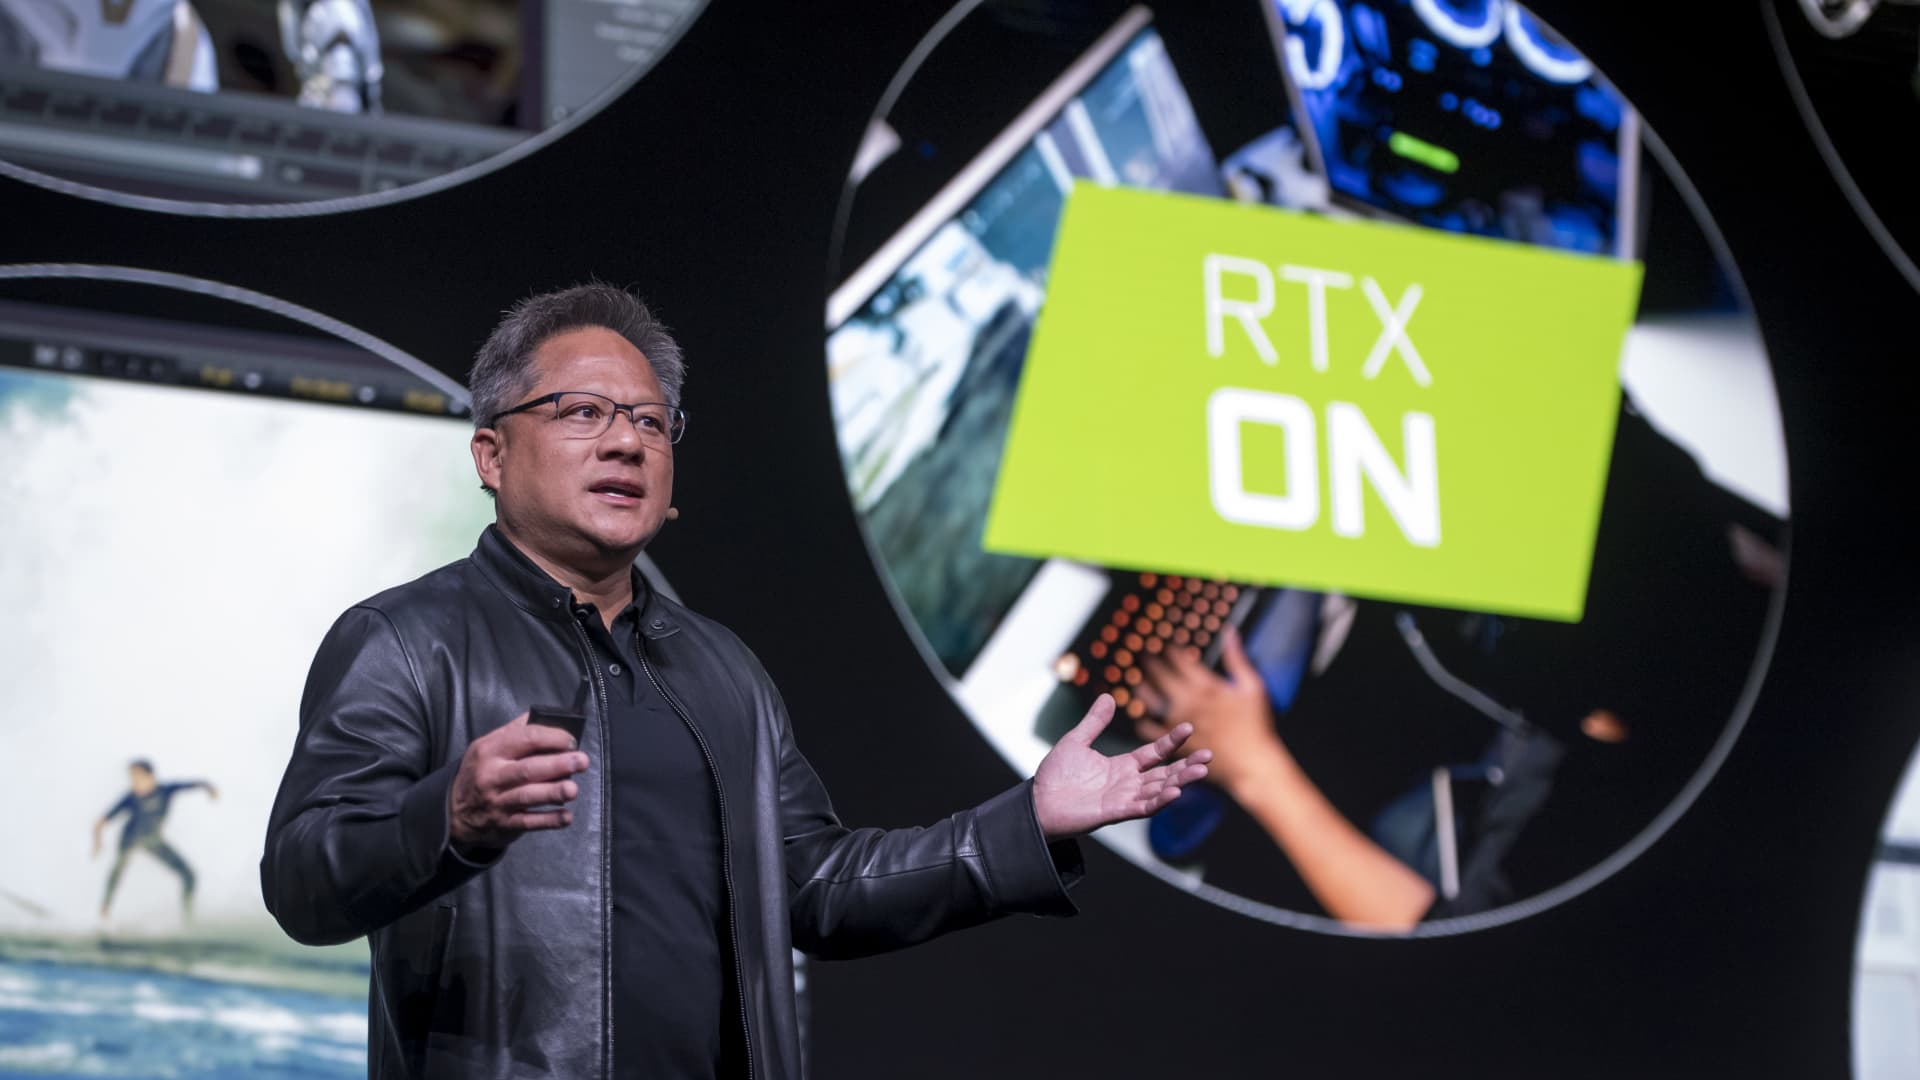 Jensen Huang, president and CEO of Nvidia, speaks during the company's event at the 2019 Consumer Electronics Show in Las Vegas on Jan. 6, 2019.